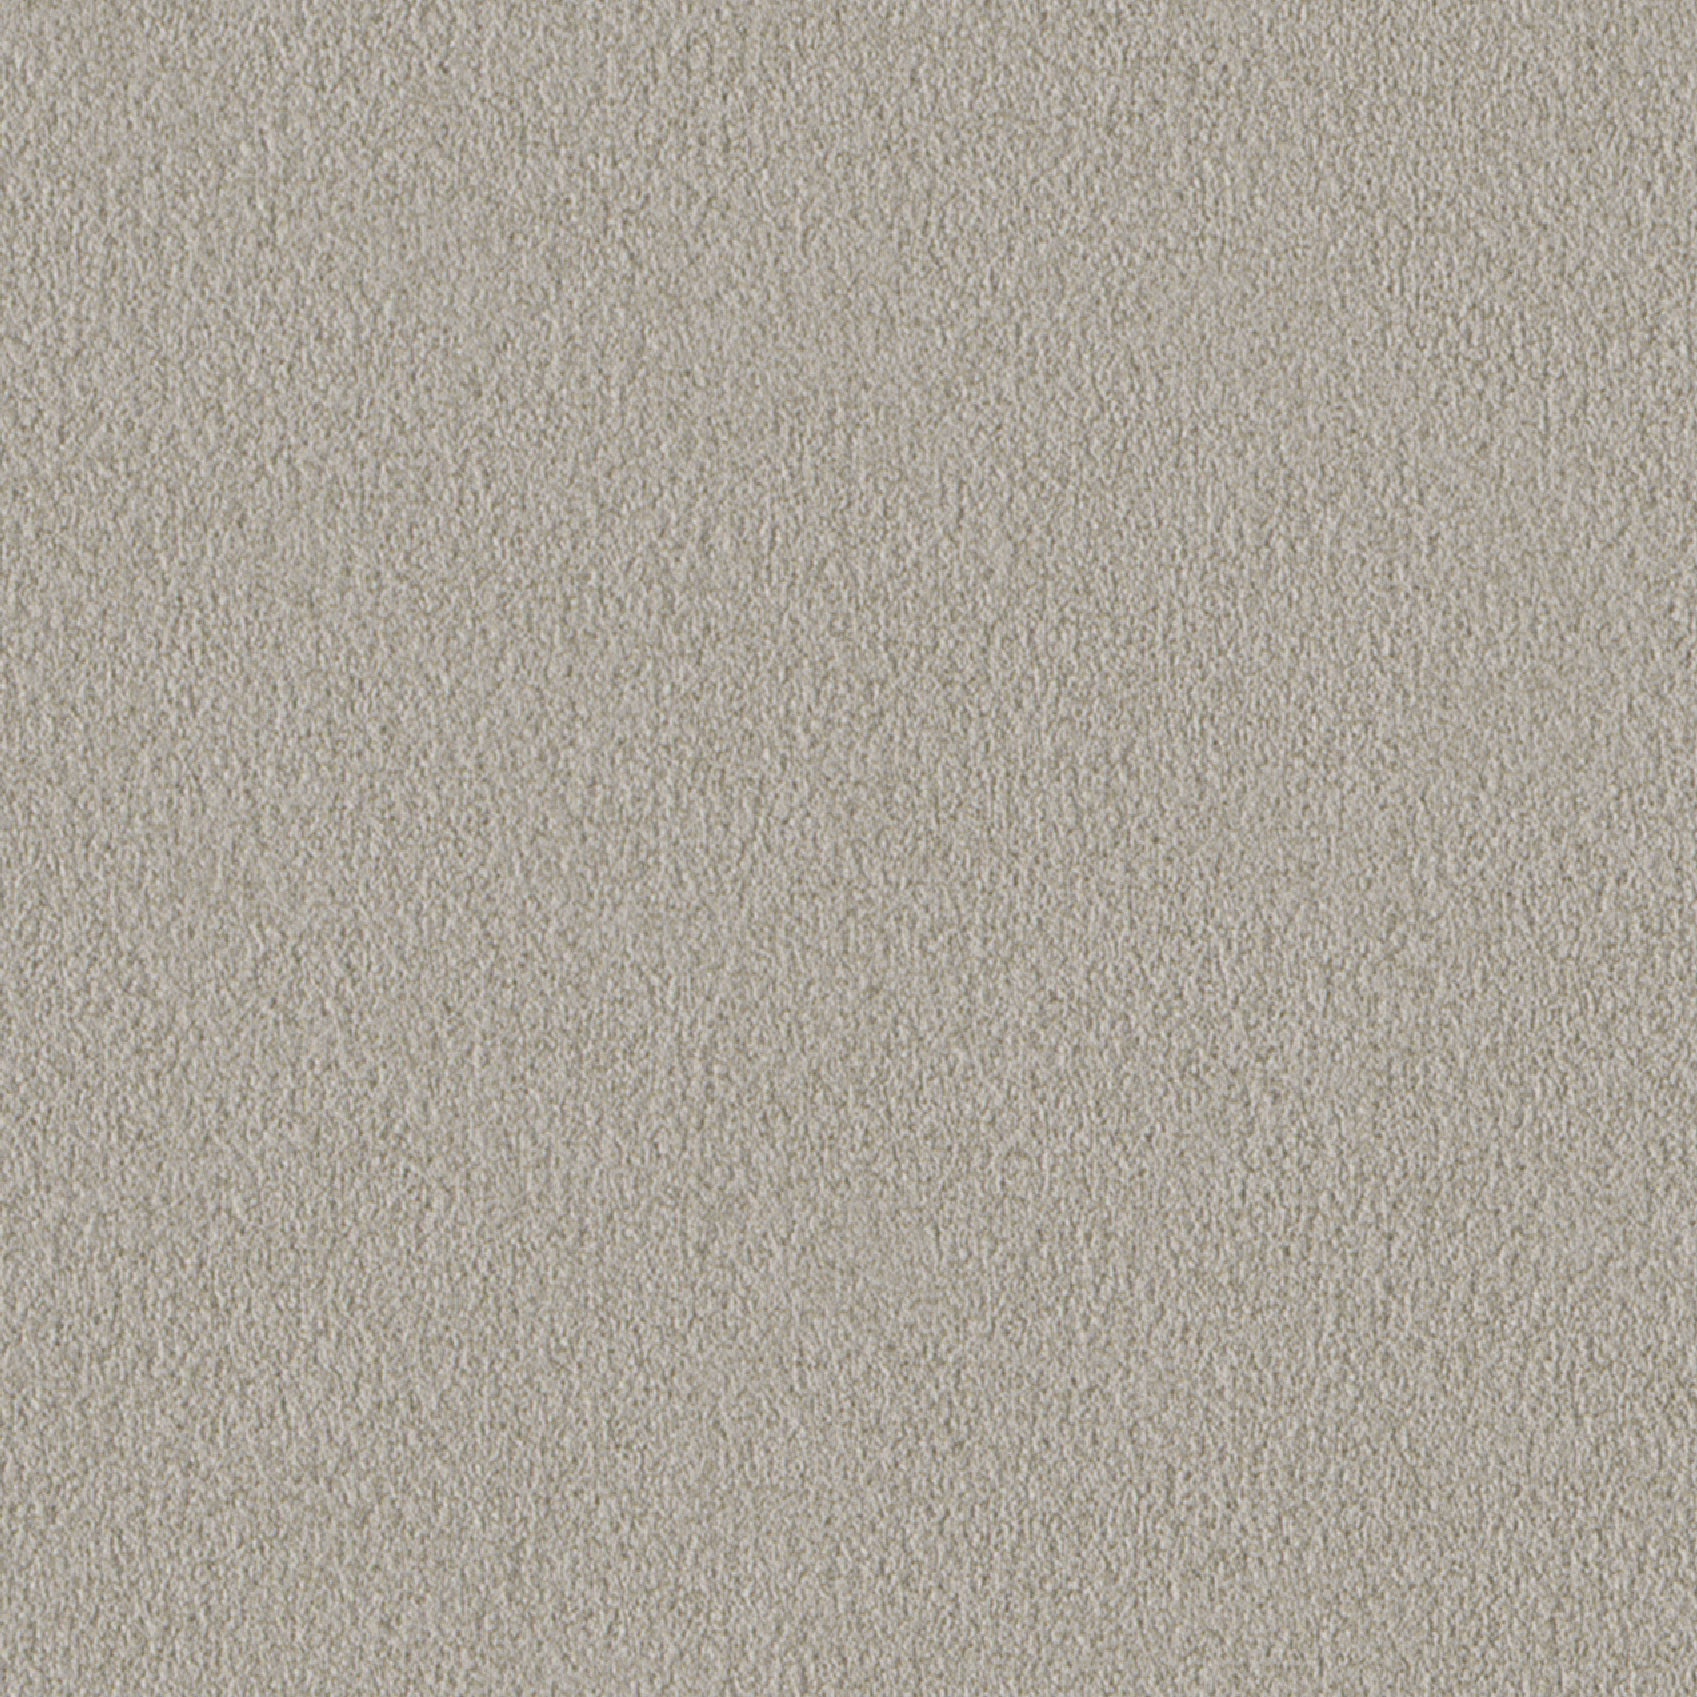    Andriali-Contract-Vinyl_Upholstery-Design-Serenity-Color-015Stone-Width-140cm